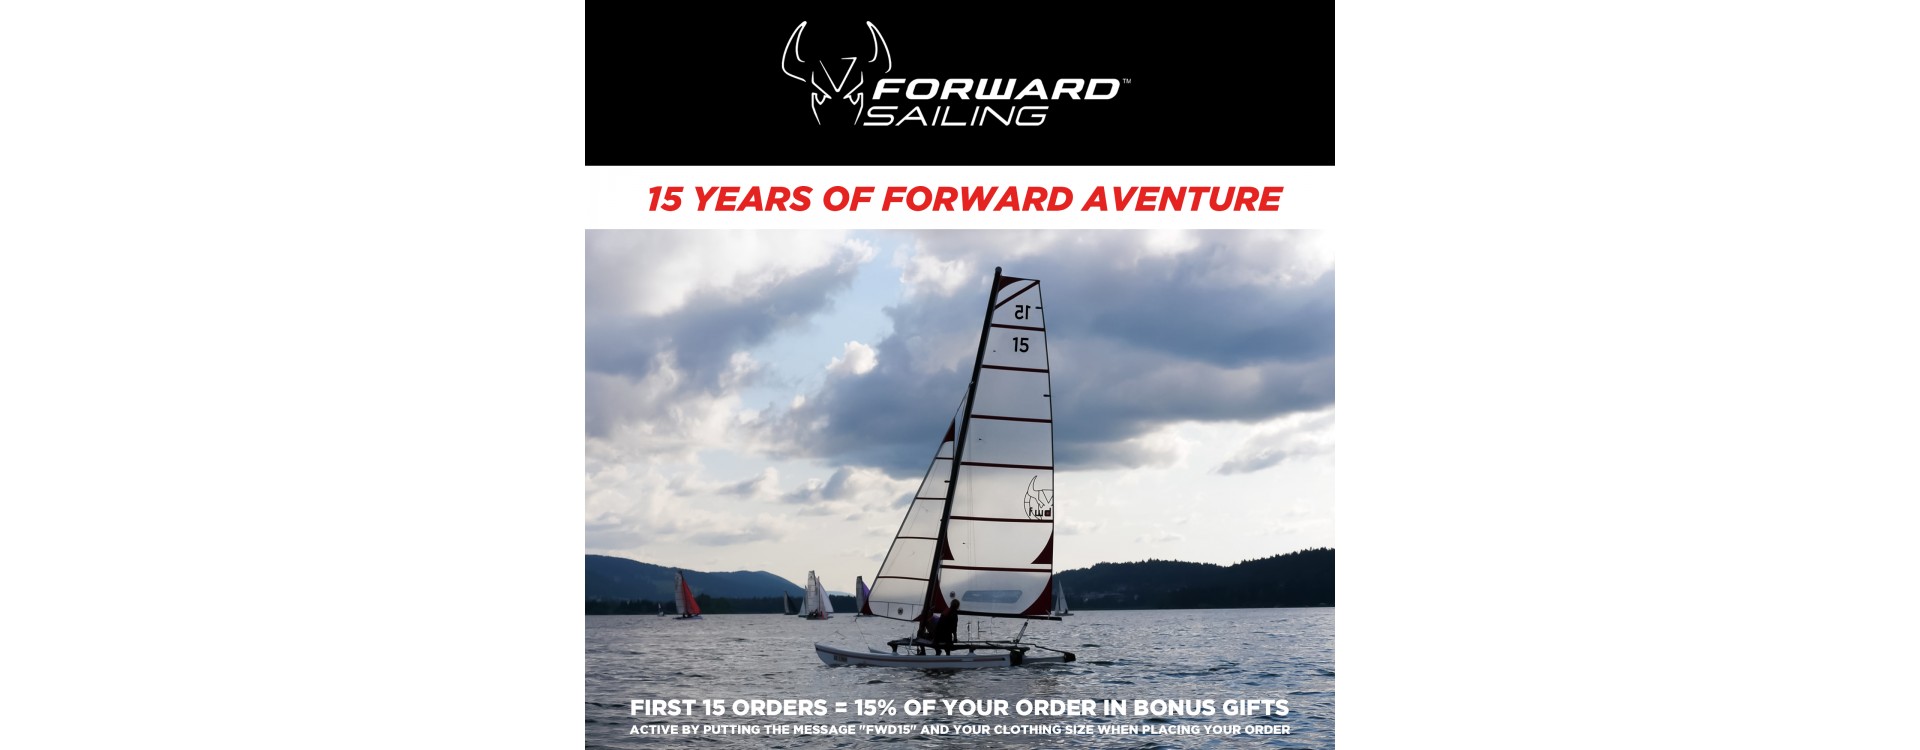 SPECIAL OFFER 15 YEARS OF FORWARD SAILING